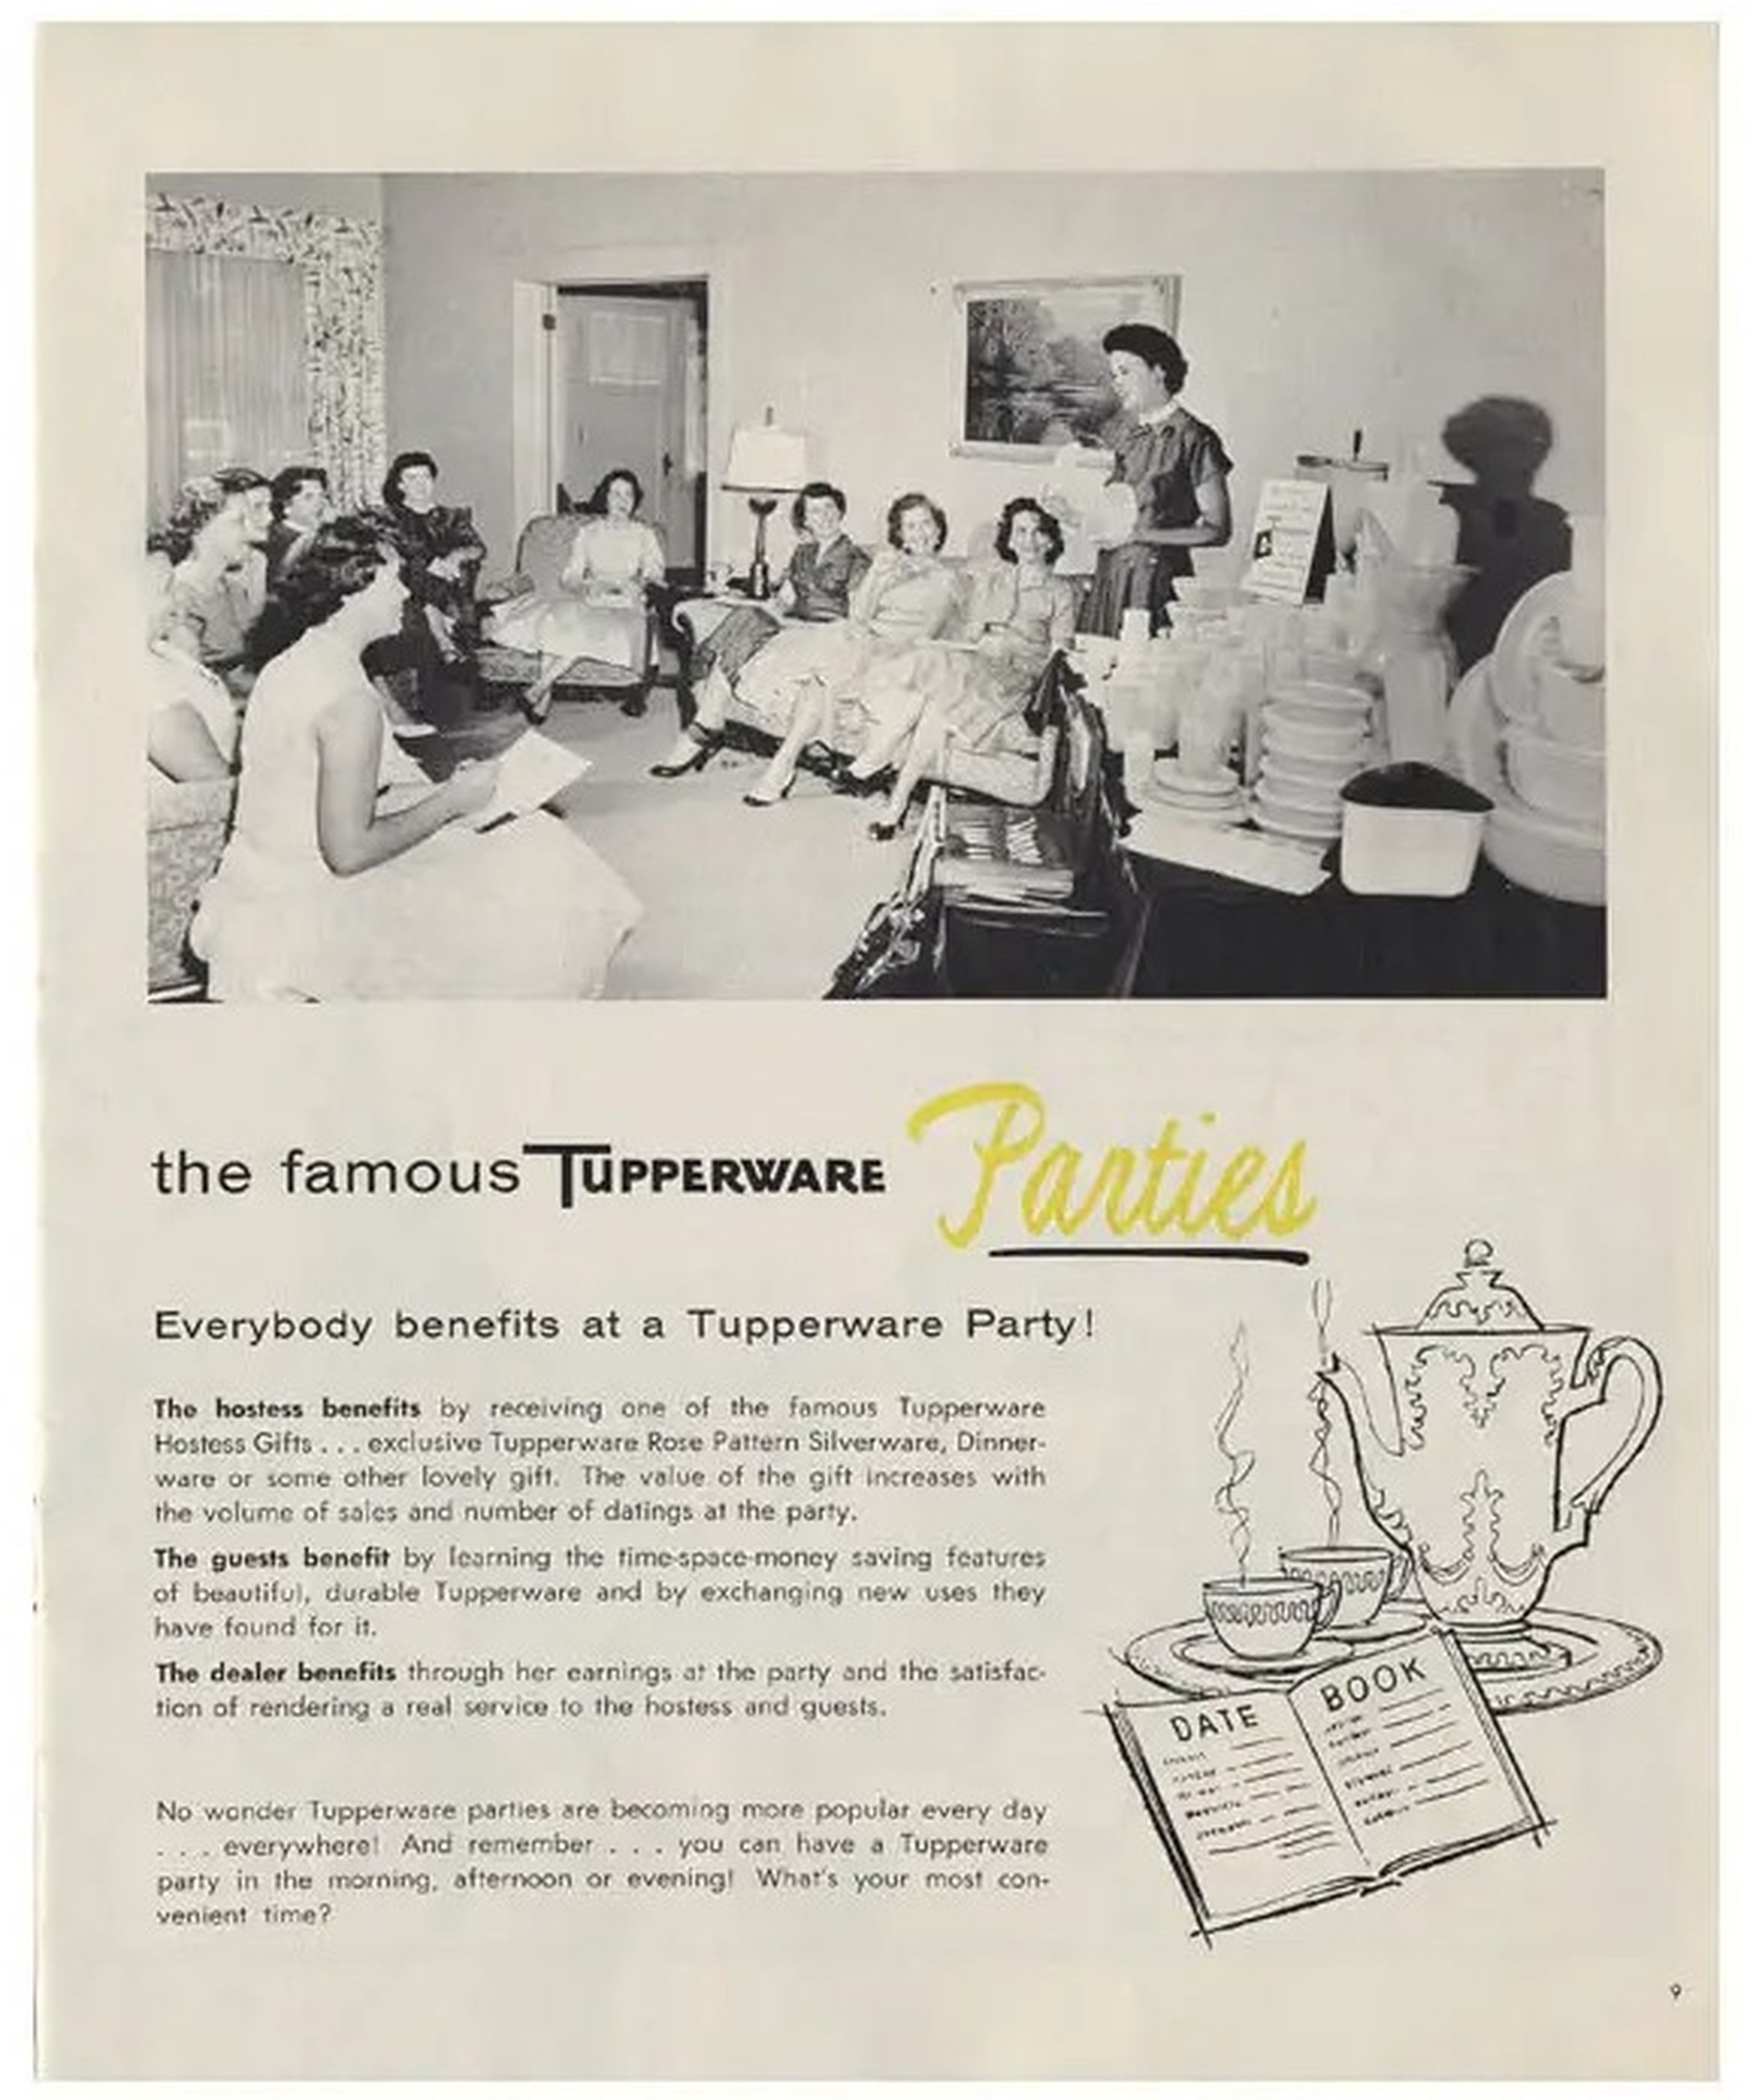 A Tupperware party ad features a photo of a Tupperware Party and declares "Everybody benefits at a Tupperware Party!"